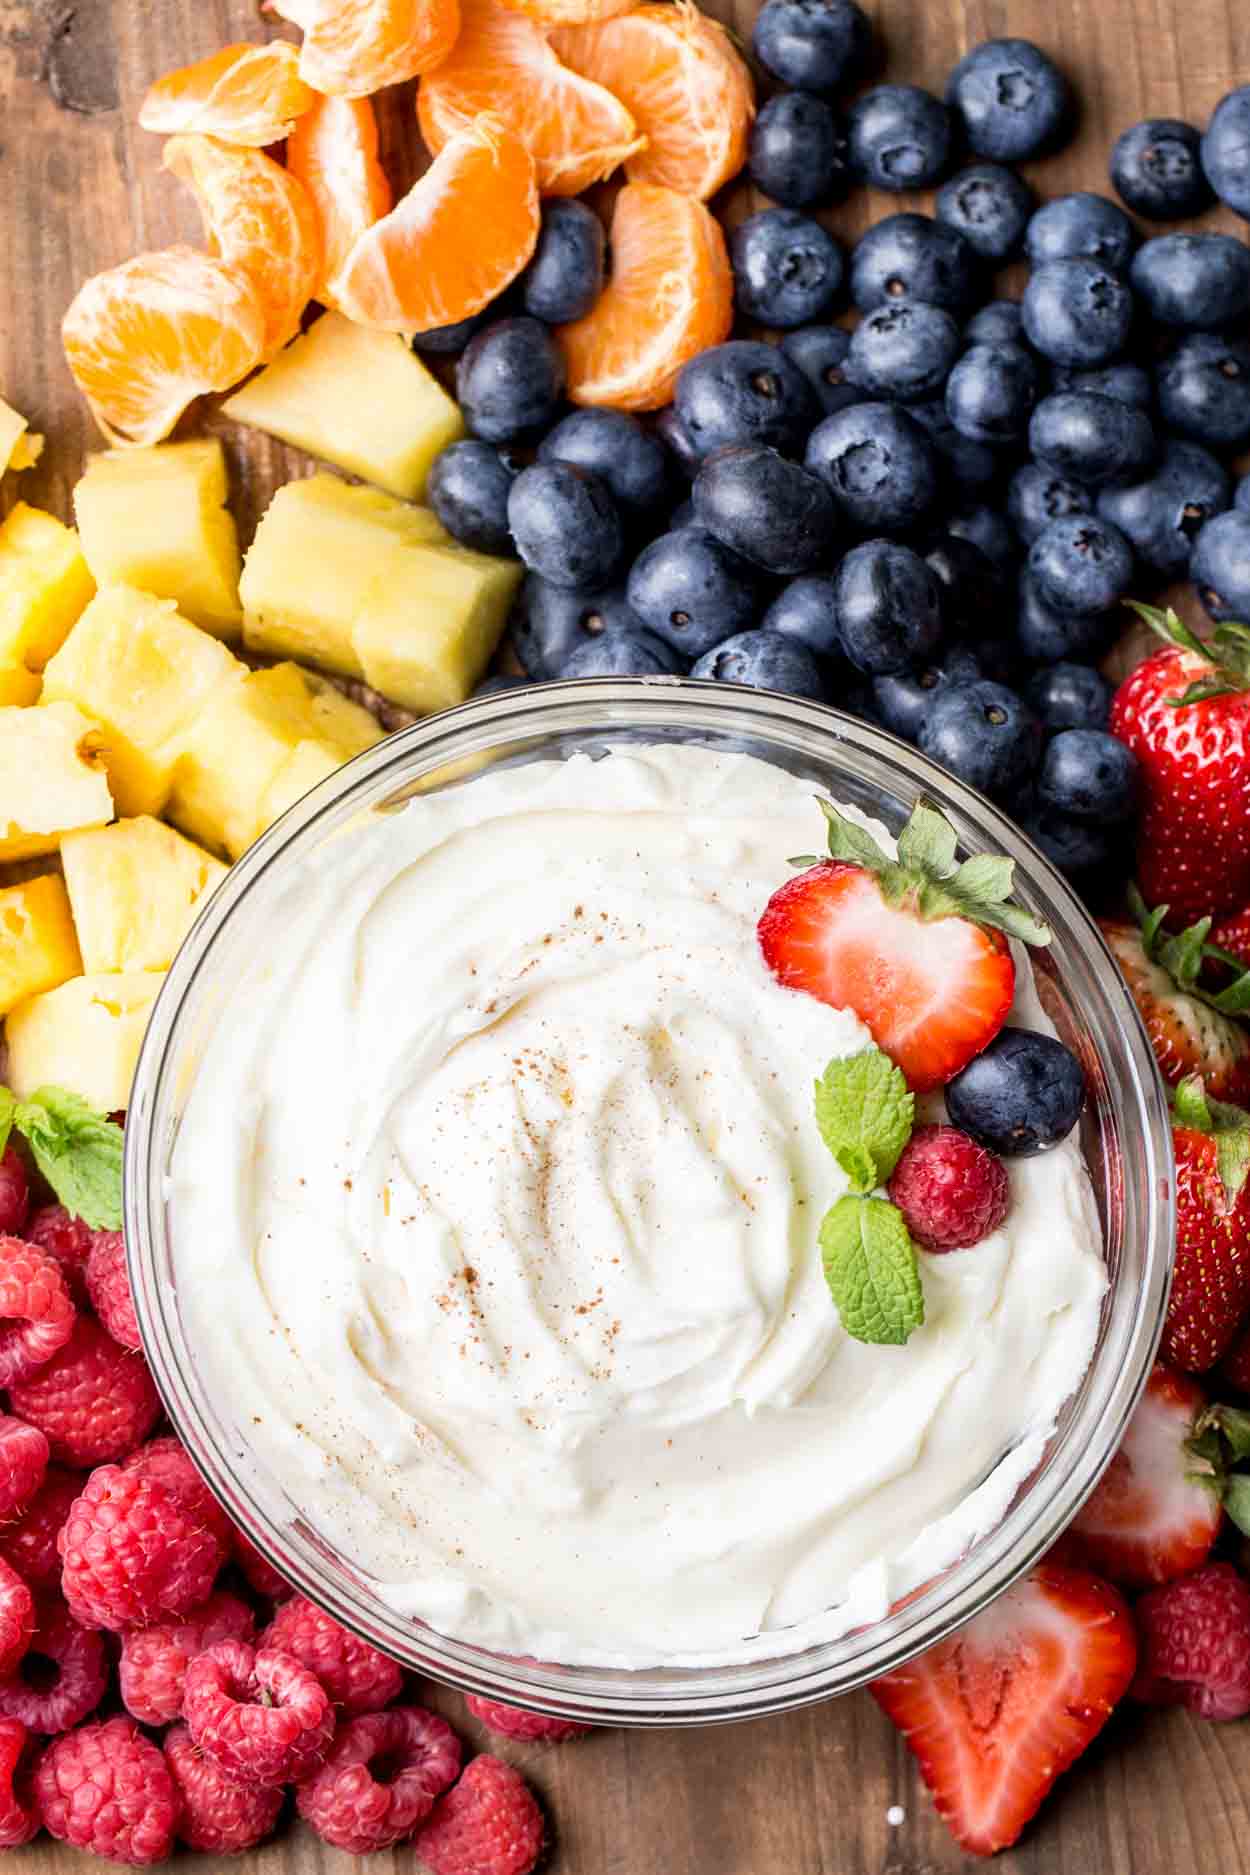 Cream cheese dip in a bowl with fresh berries.